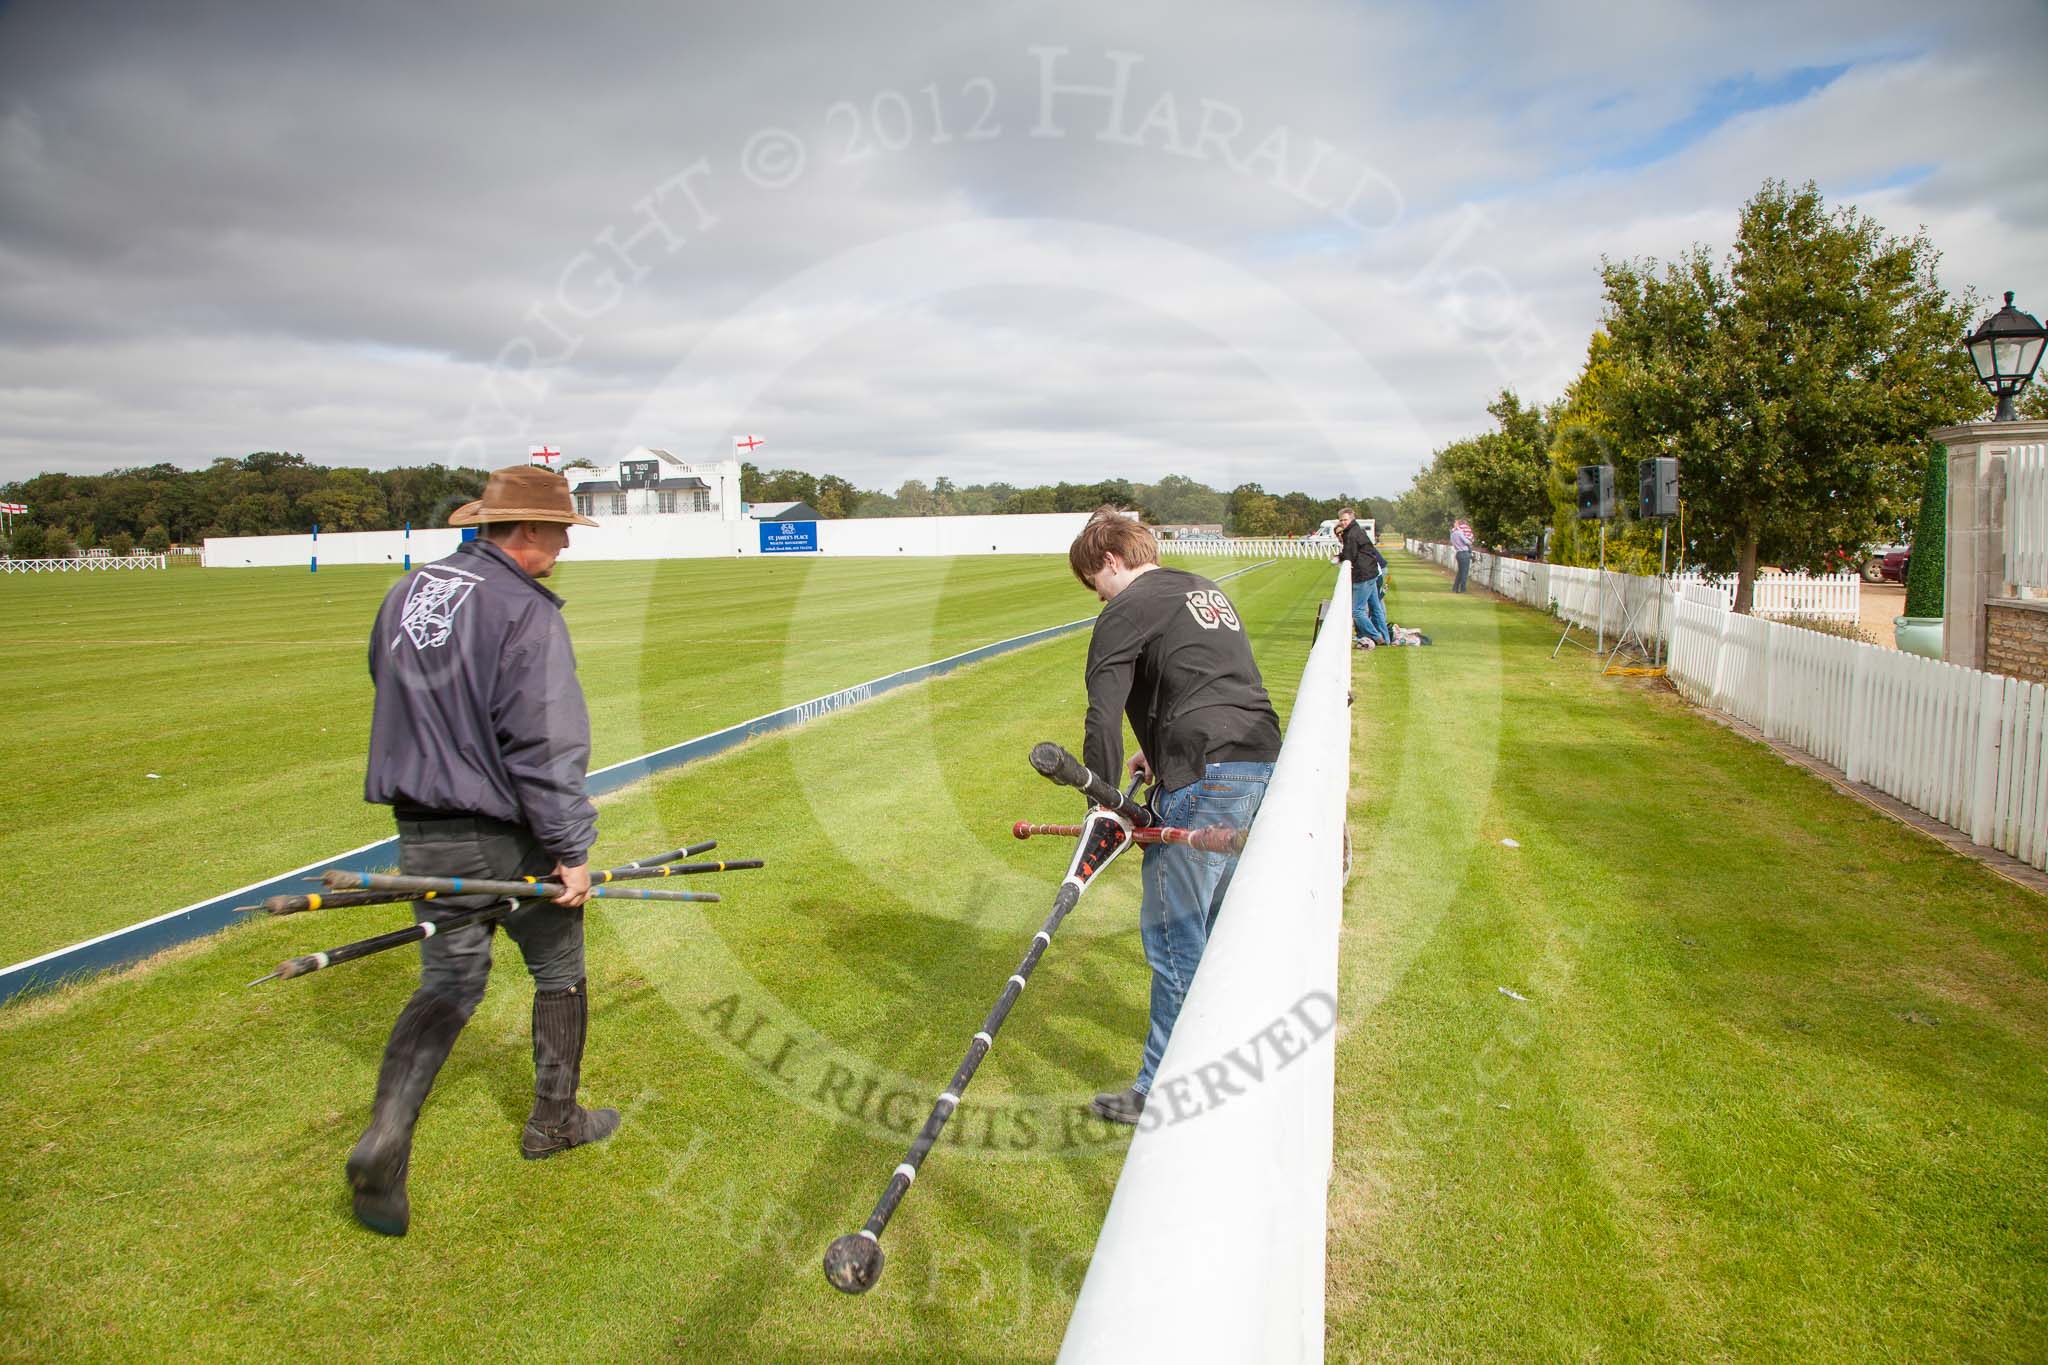 DBPC Polo in the Park 2012: The Knights of Middle England - preparations for the Jousting display..
Dallas Burston Polo Club,
Stoneythorpe Estate,
Southam,
Warwickshire,
United Kingdom,
on 16 September 2012 at 11:30, image #92